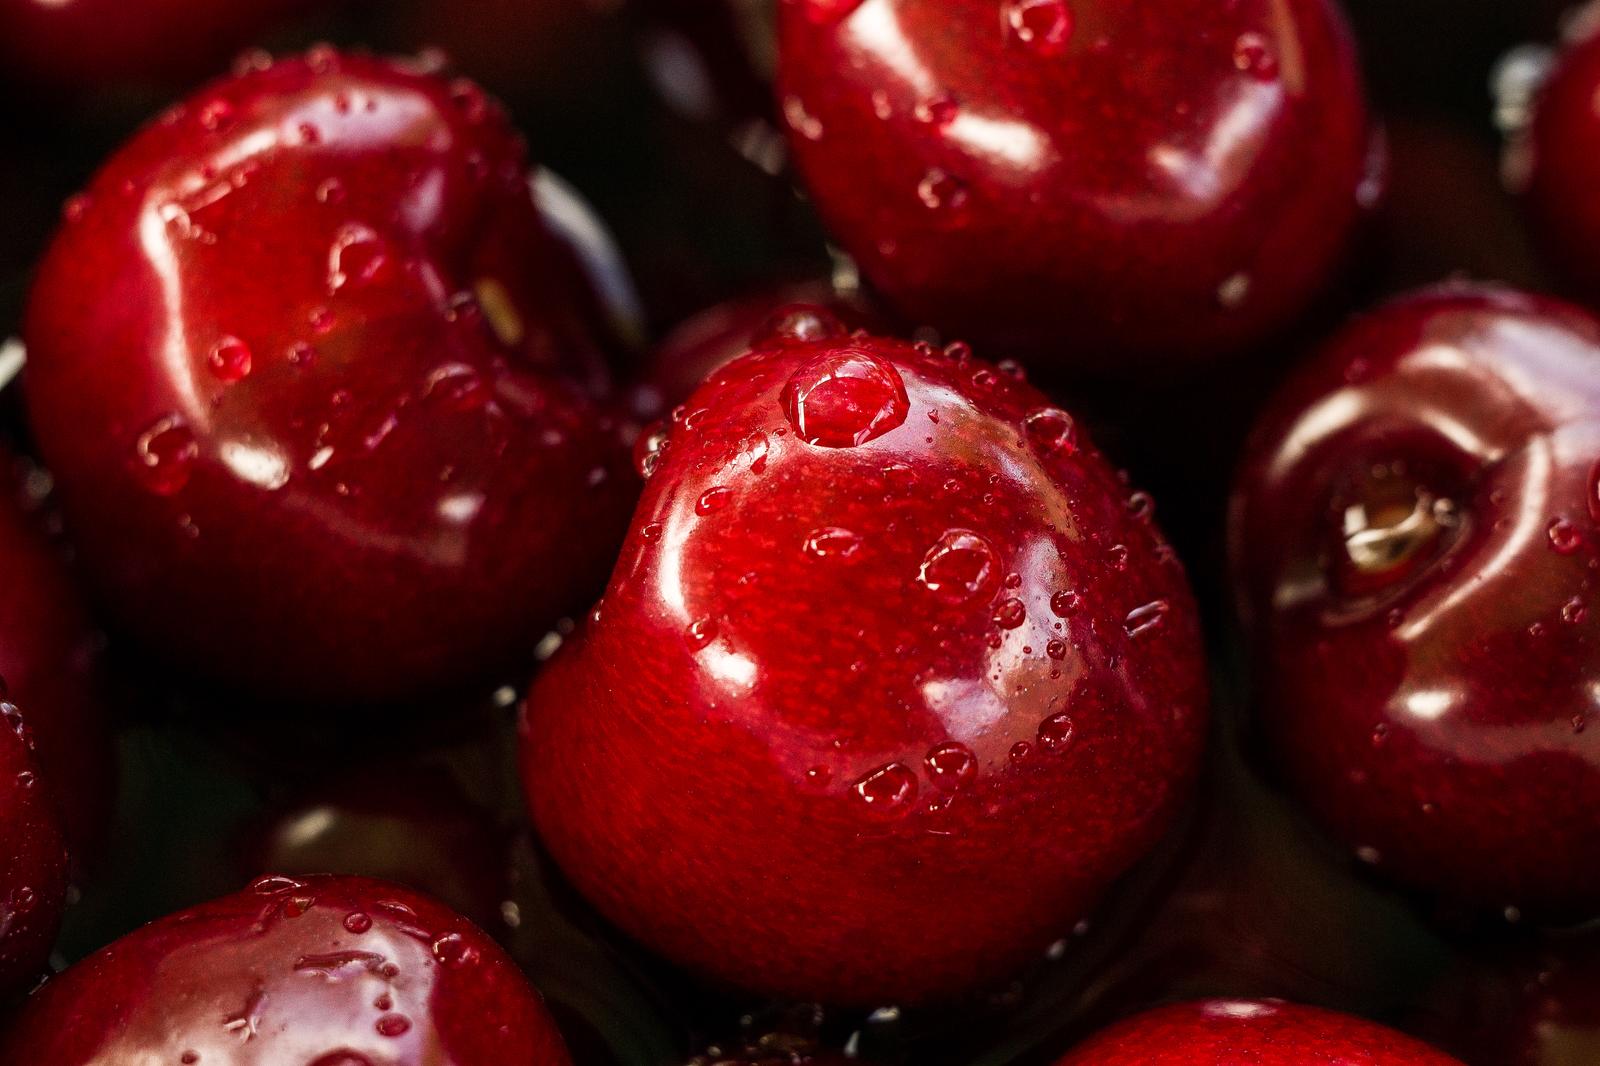 Can You Fill in the Blanks for These Common and Maybe Not-So-Common Sayings? Cherries